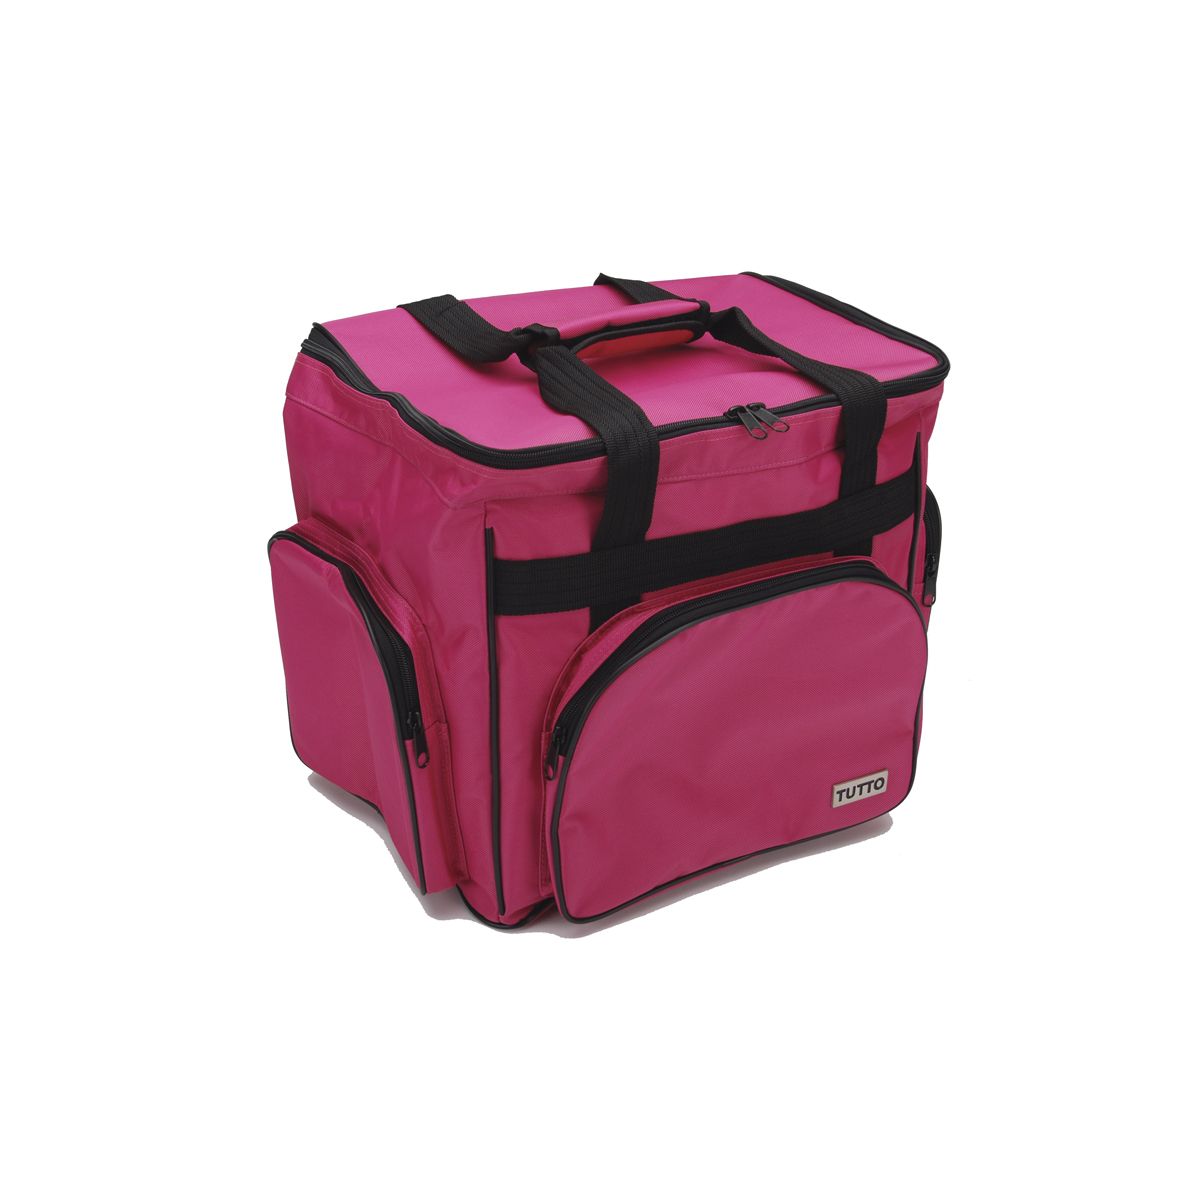 Tutto Serger & Accessory Bag, Pink